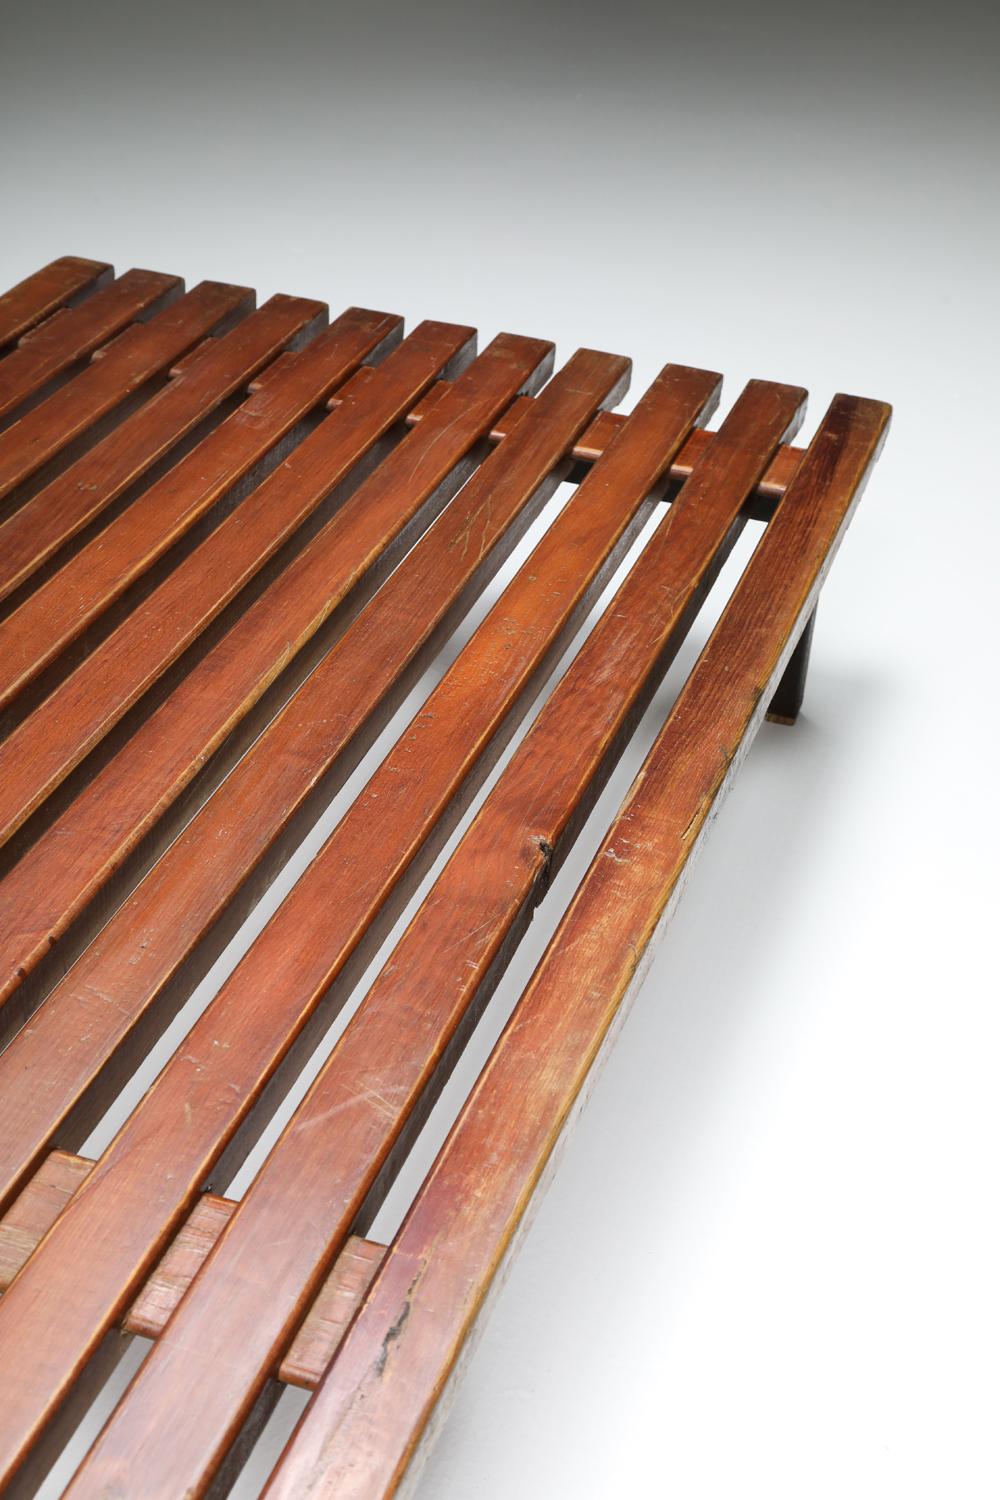 Charlotte Perriand 'Cansado' Low Bench 1